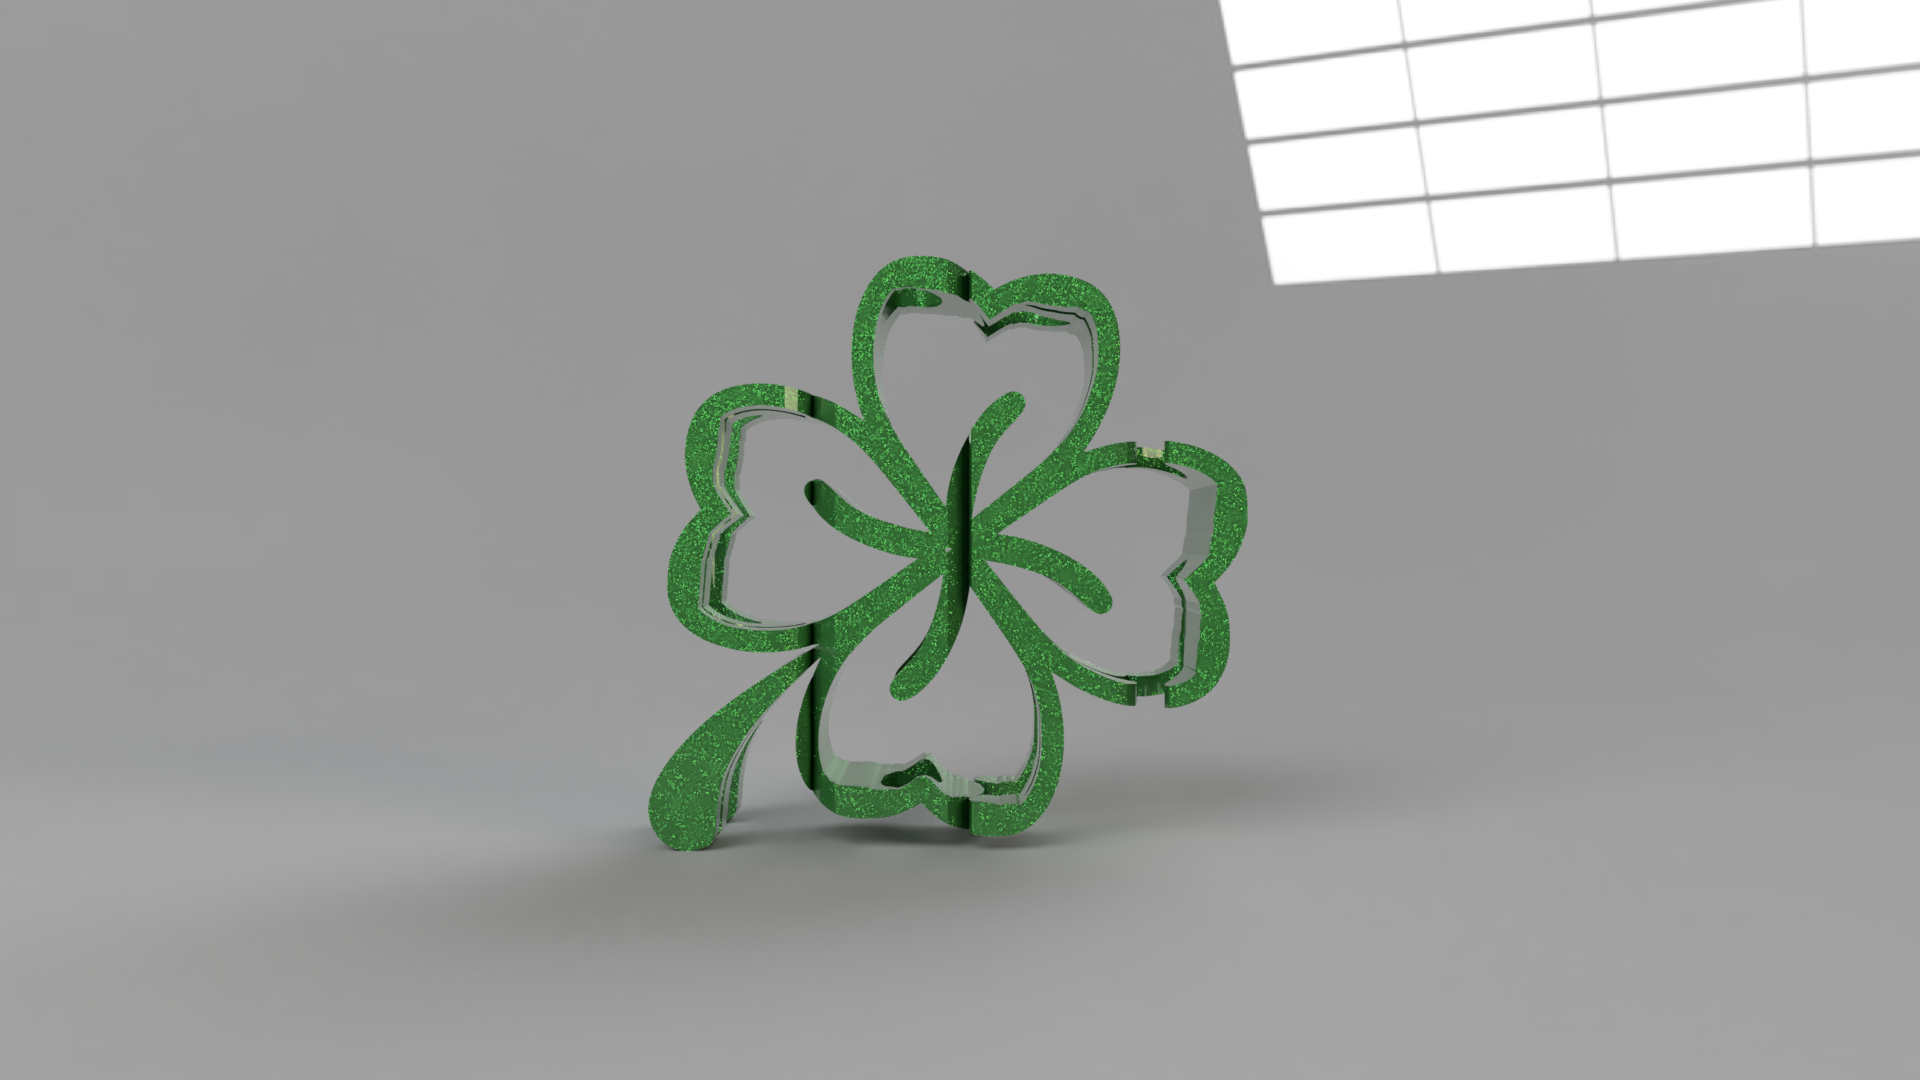 Klee2021_2020-Dec-01_03-31-43PM-000_CustomizedView33427928024.png Download free STL file Shamrock 2021 • 3D printing model, TimBauer-TB3Dprint